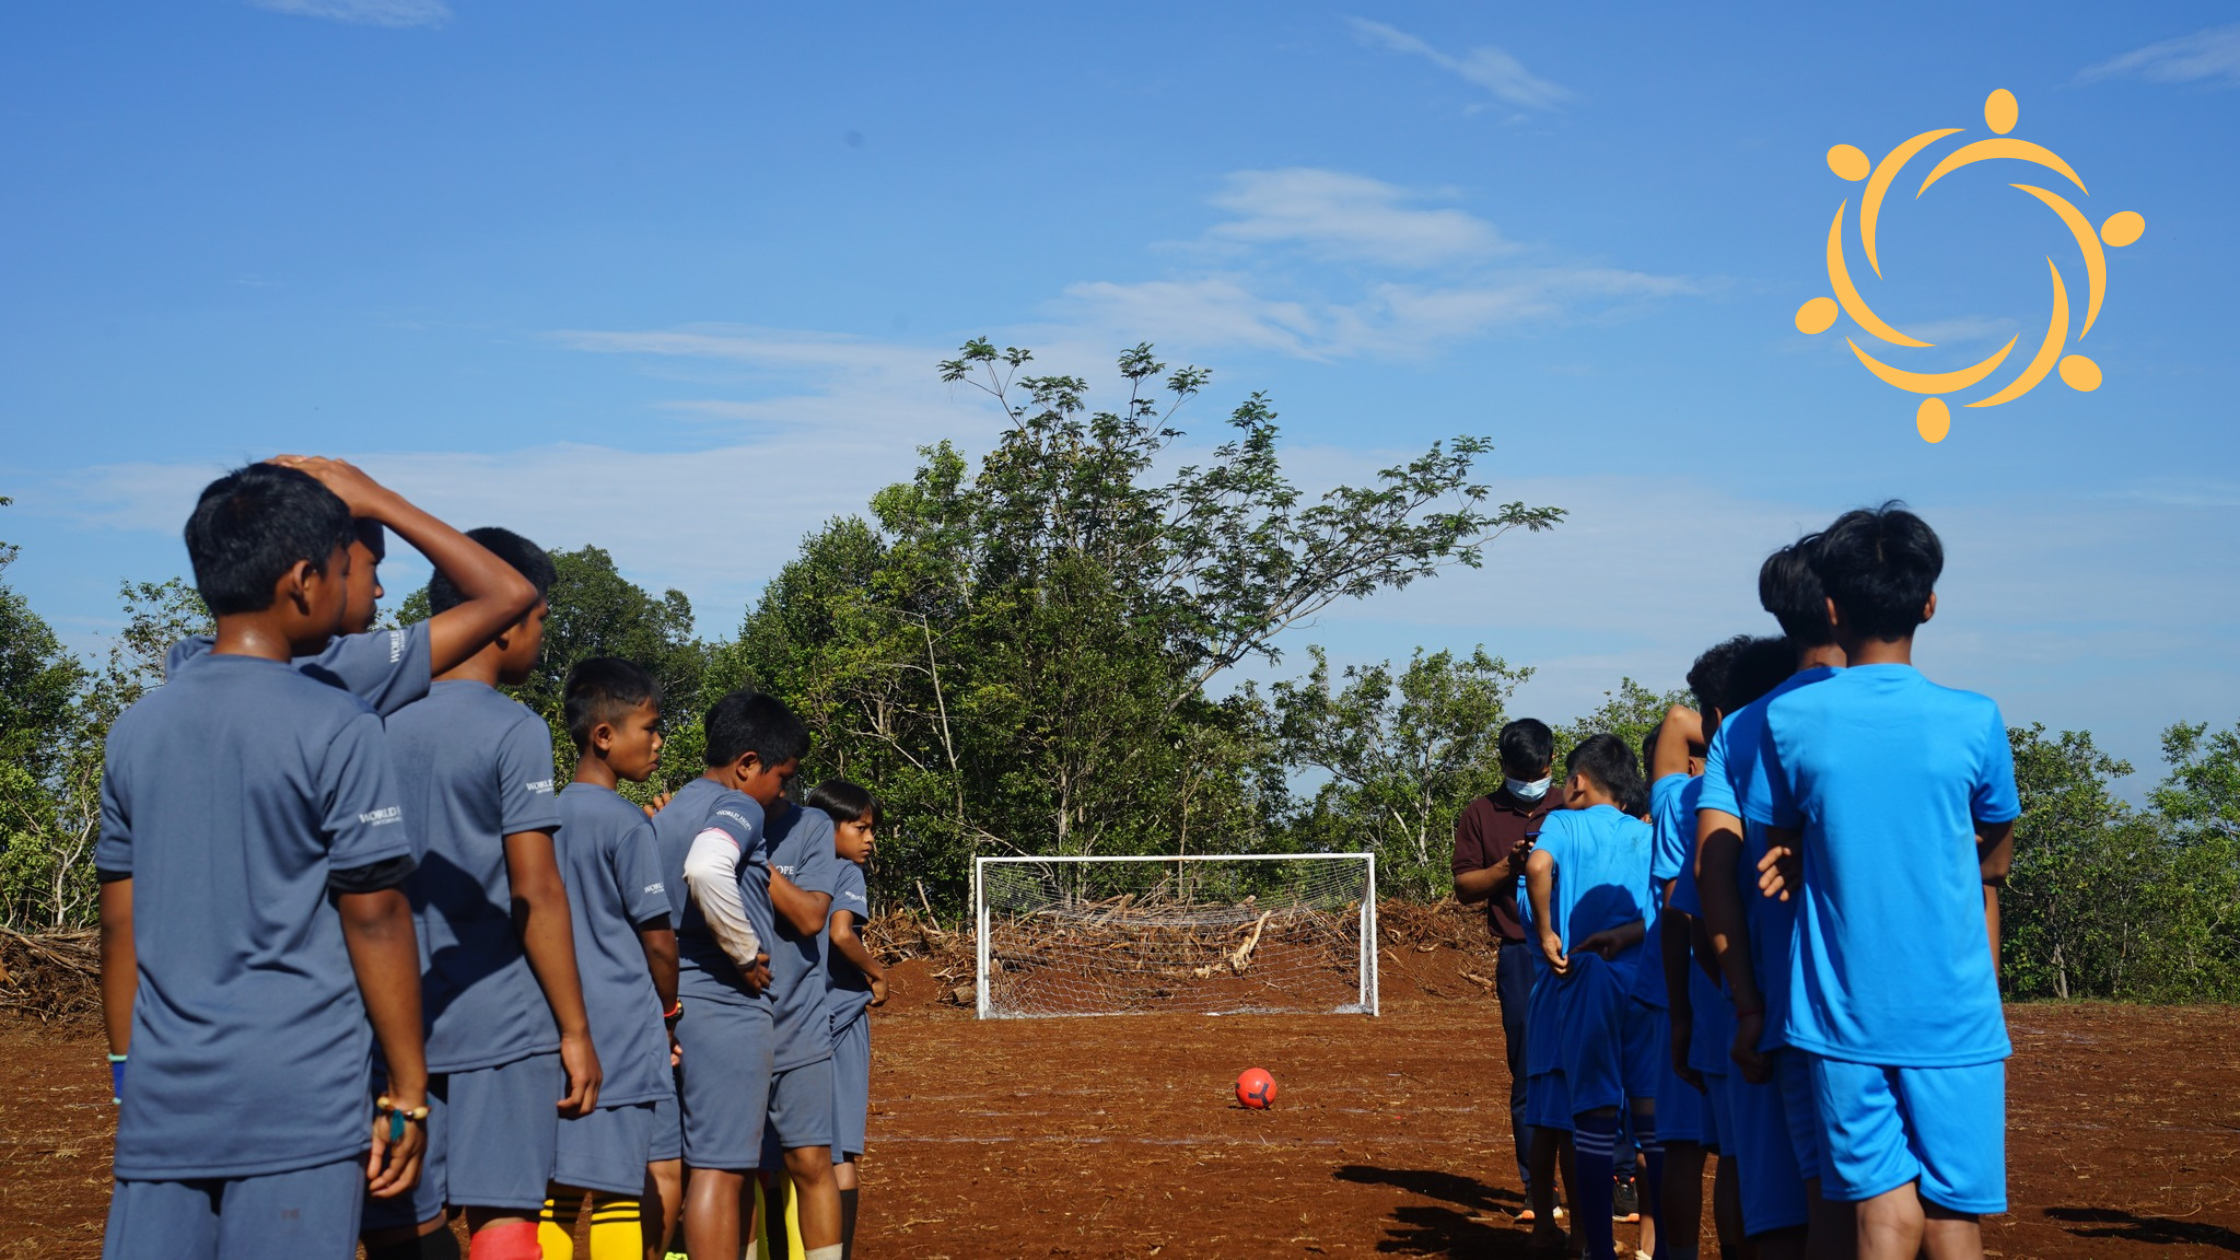 kids playing soccer in the after-school program